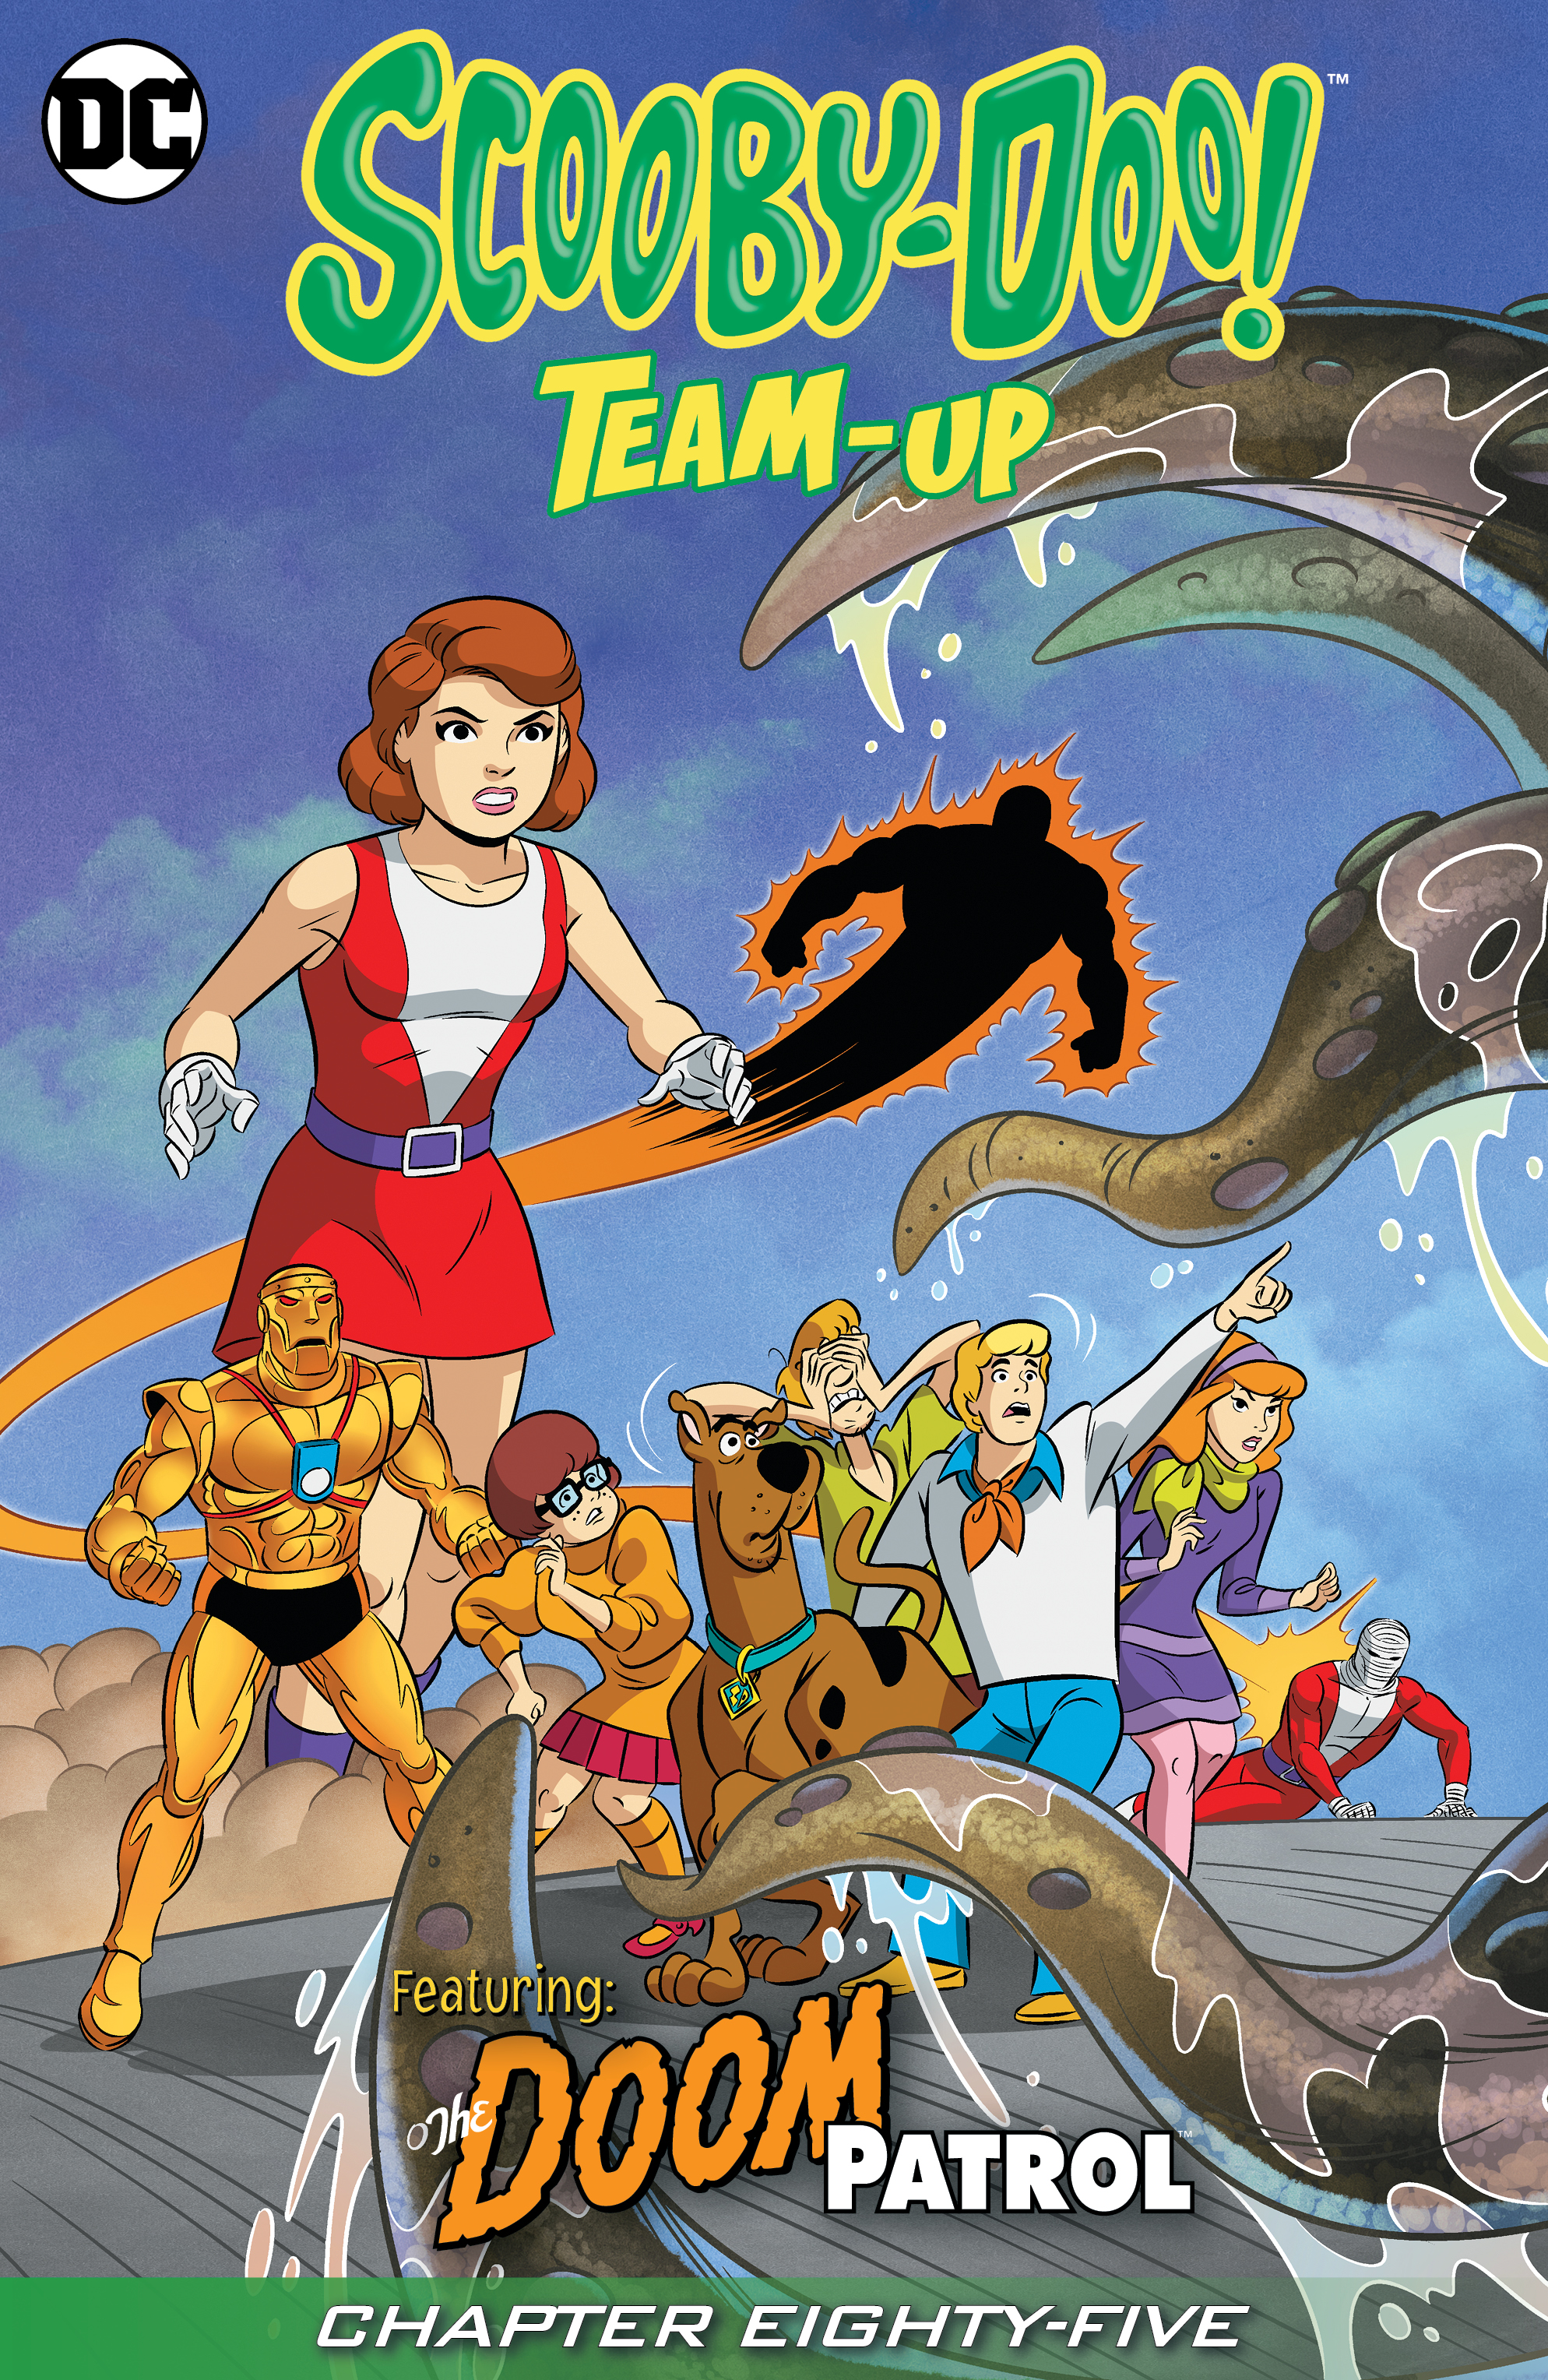 Scooby-Doo Team-Up #85 preview images